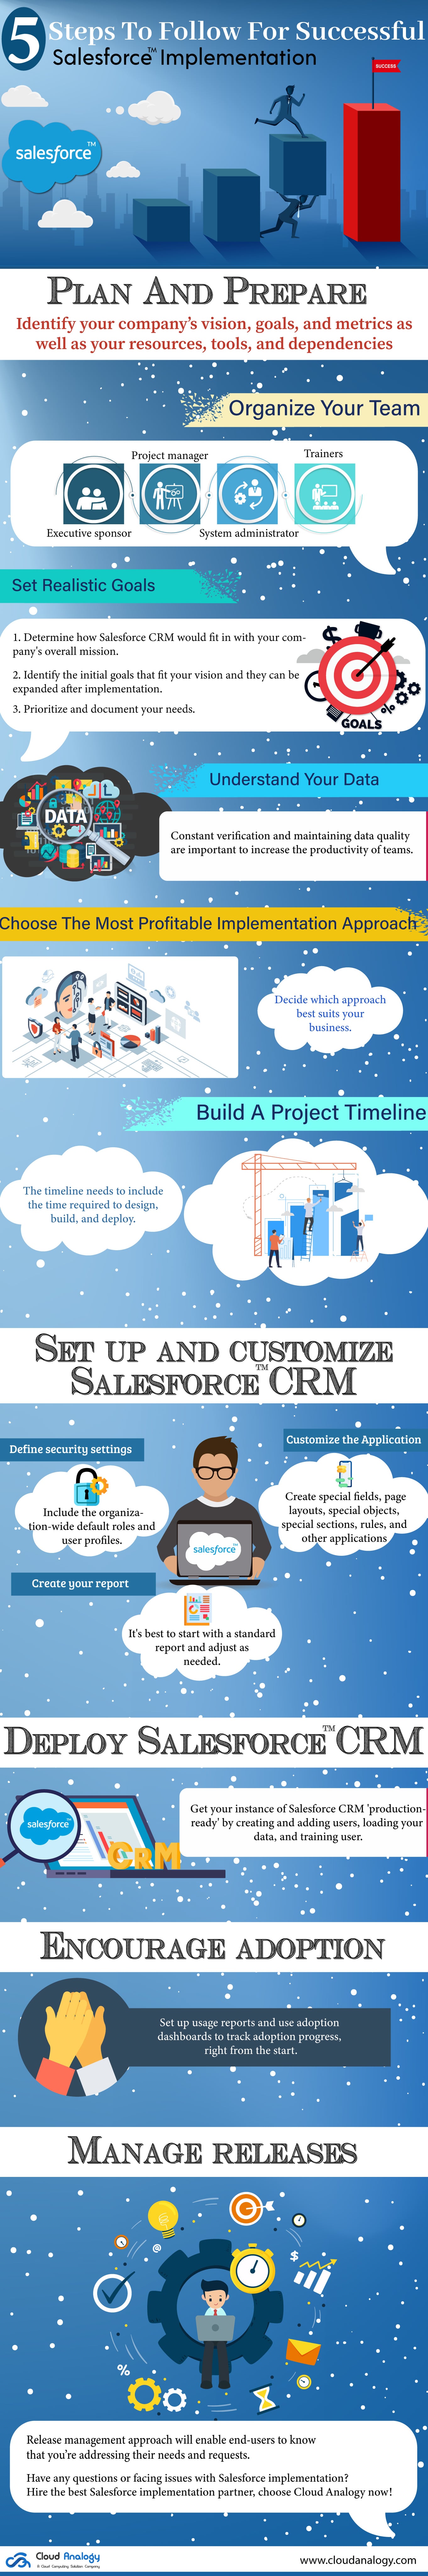 5 steps to follow for successful Salesforce Implementation